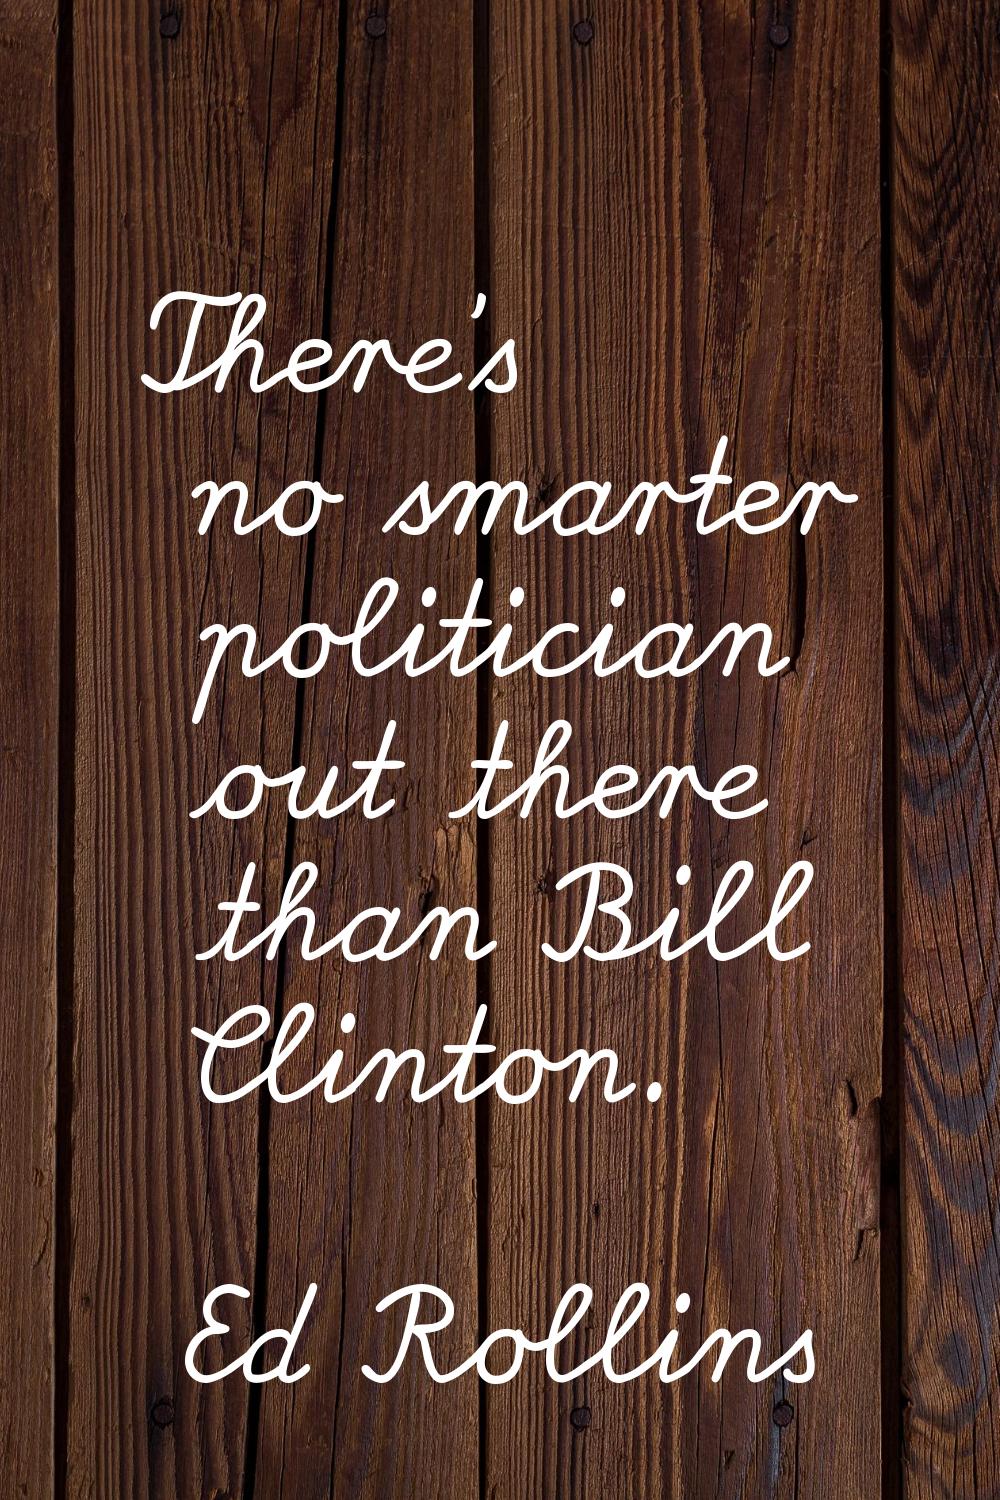 There's no smarter politician out there than Bill Clinton.